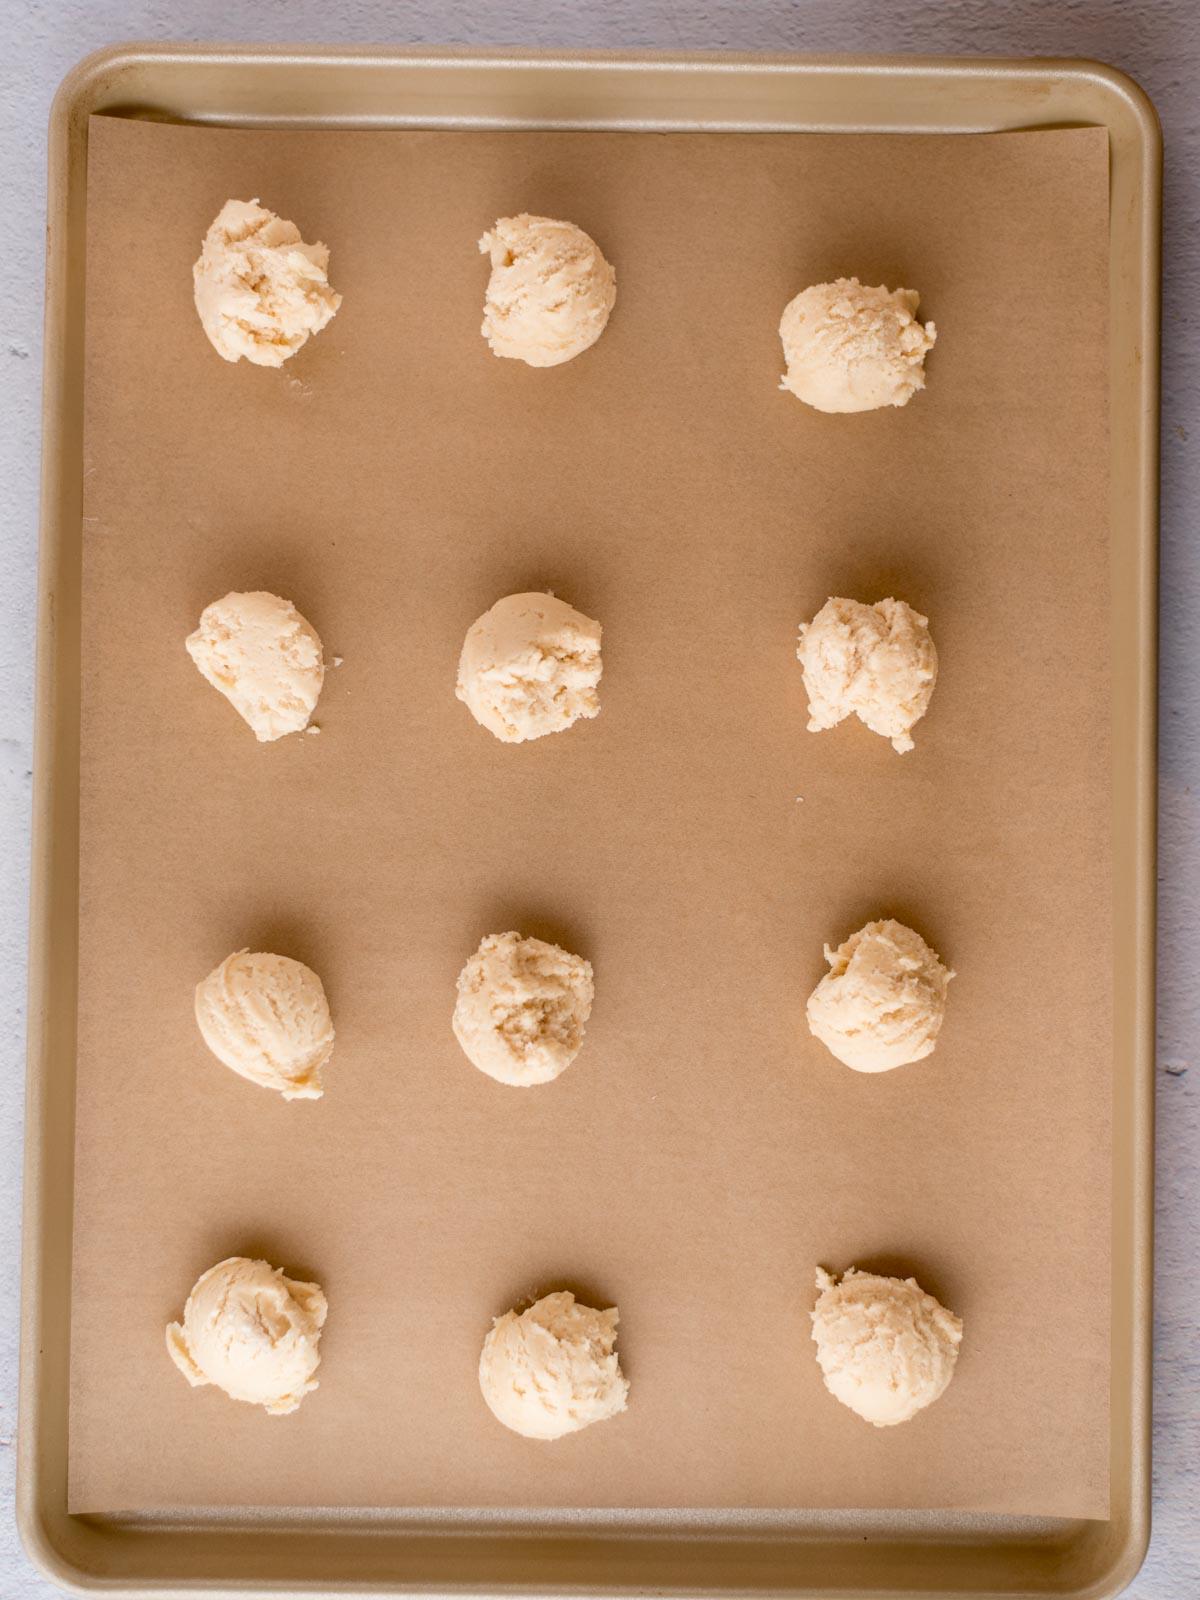 scooped balls of condensed milk cookie dough on a parchment lined baking sheet